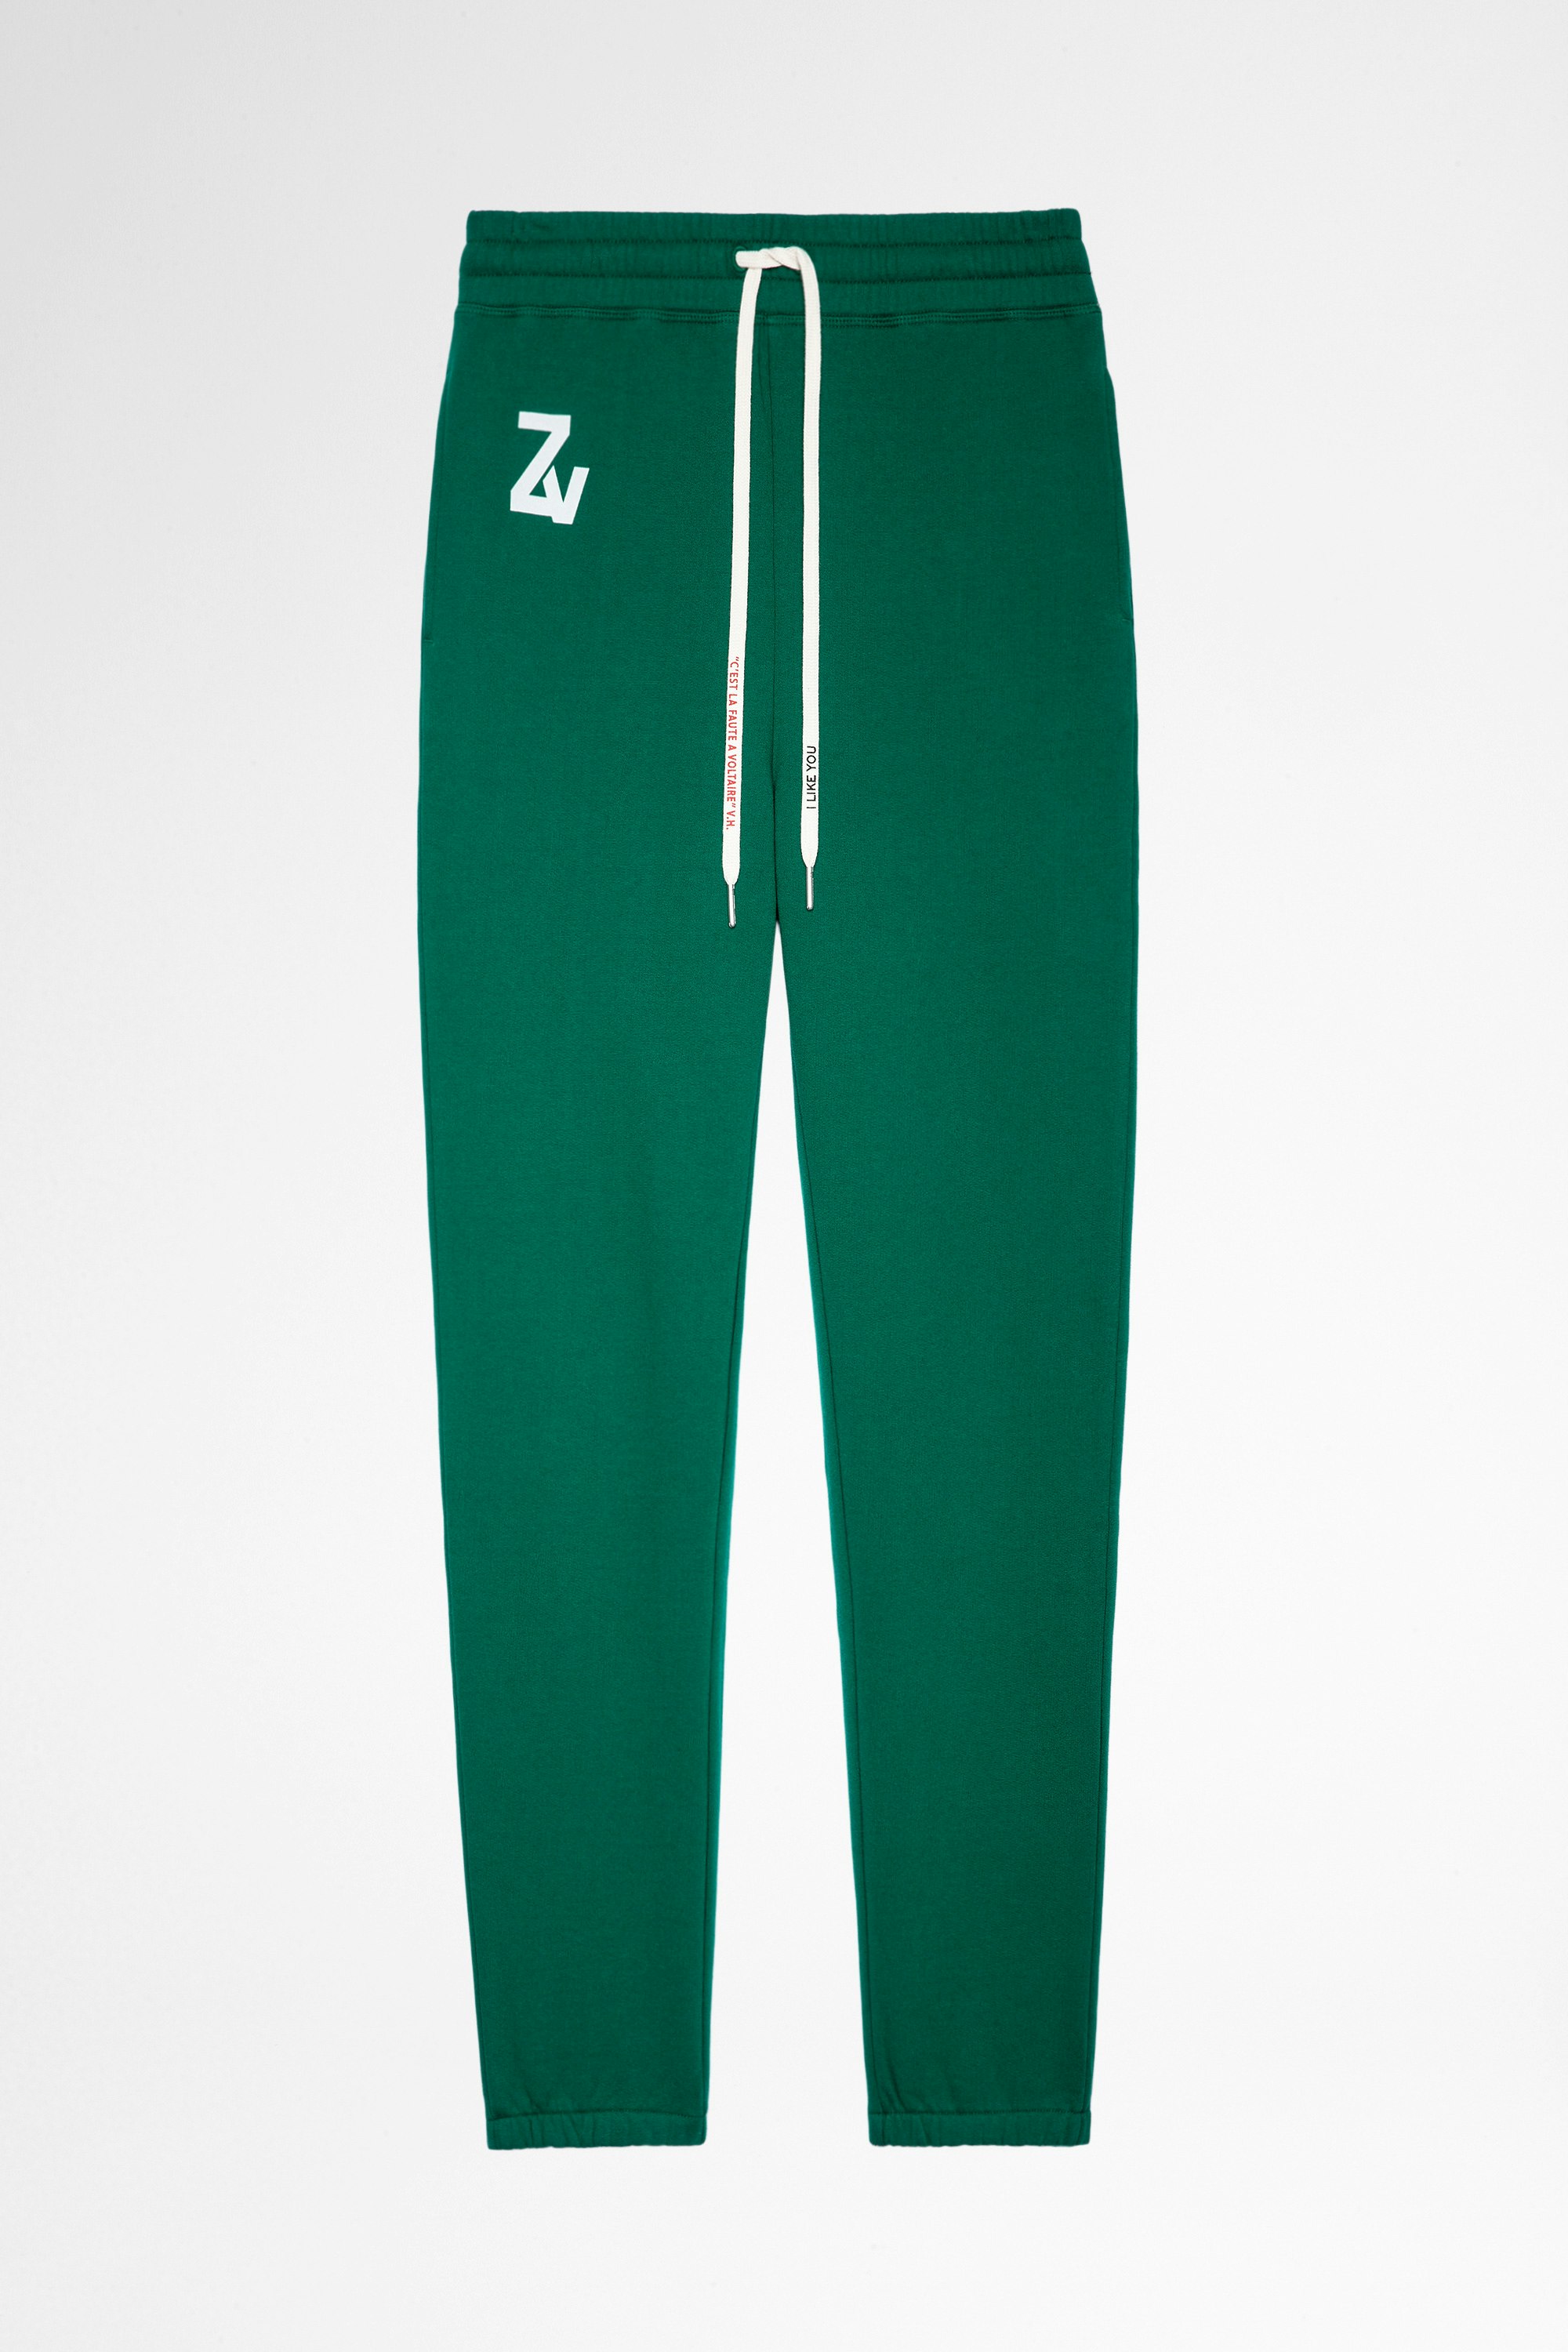 Steevy Sweatpants Women's green cotton sweatpants. This product is GOTS certified and made with fibers from organic farming.